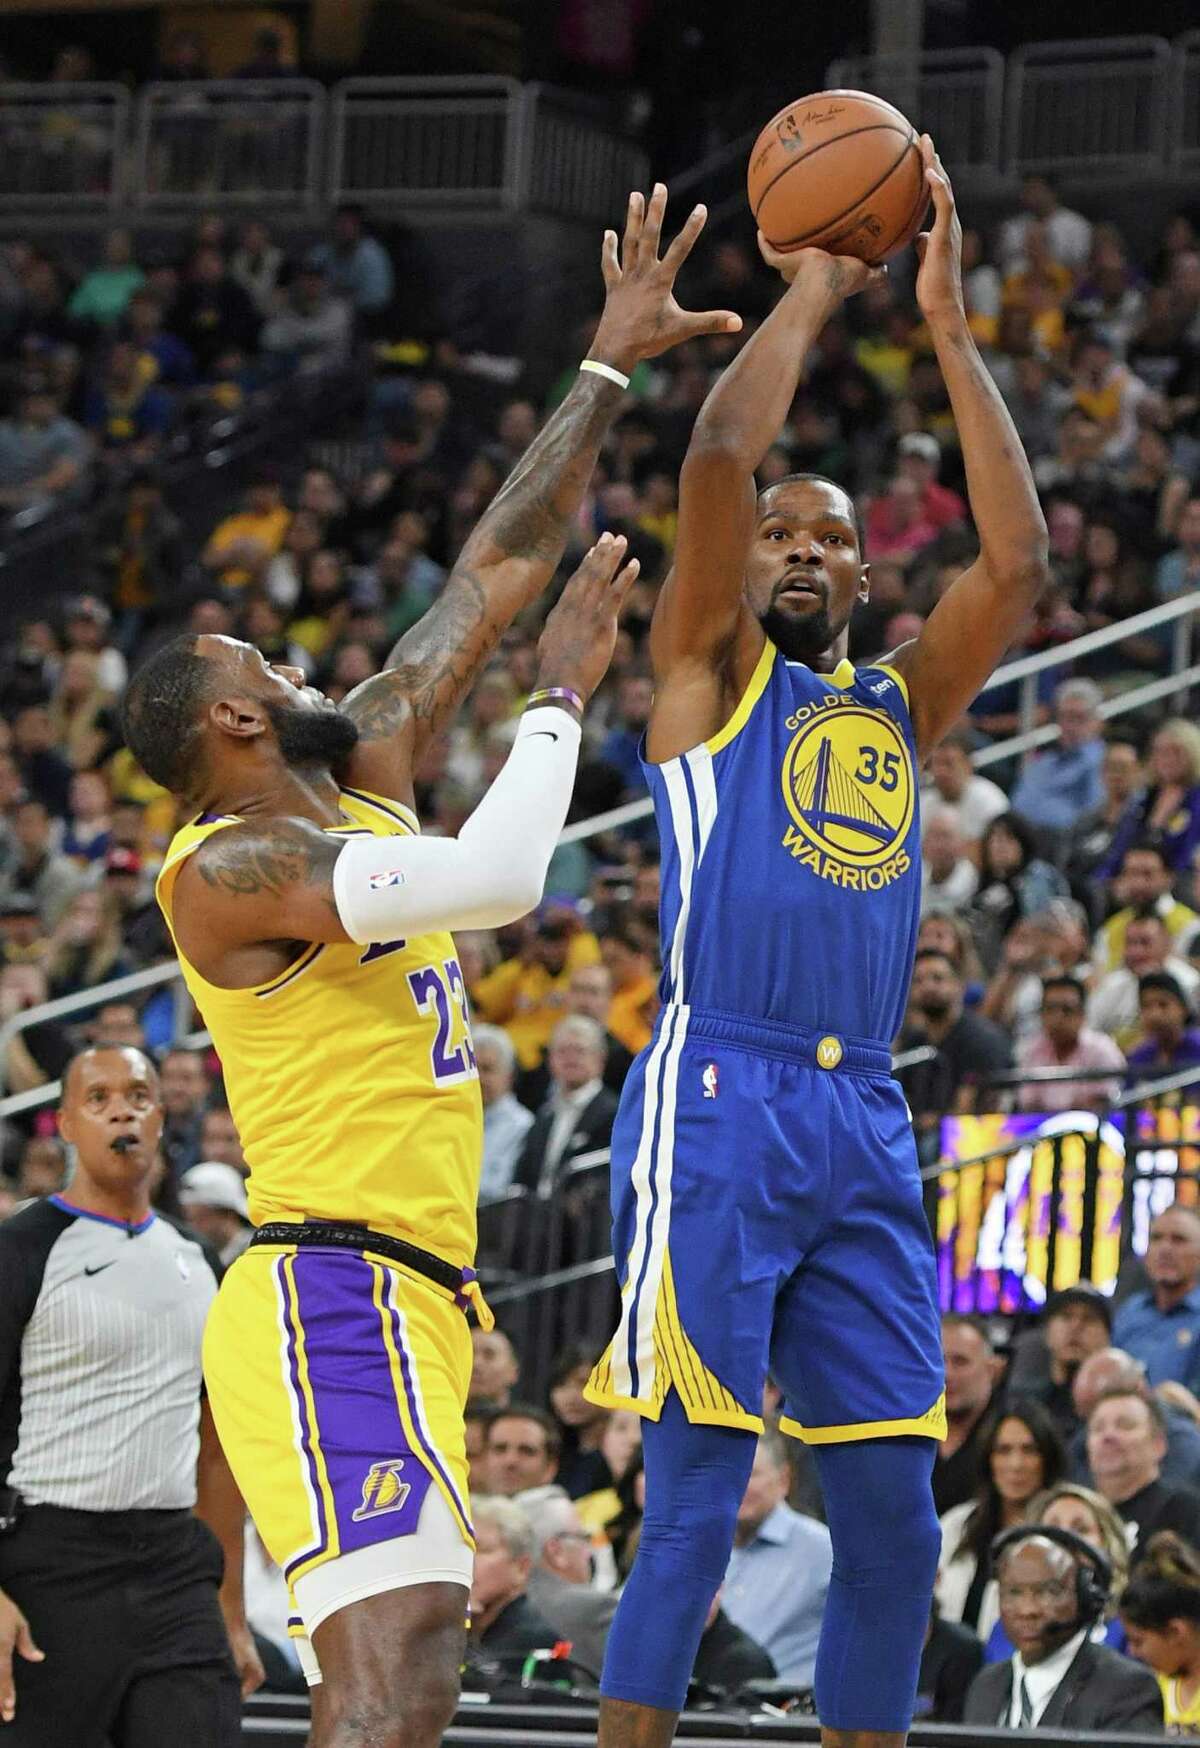 LAS VEGAS, NEVADA - OCTOBER 10: Kevin Durant #35 of the Golden State Warriors shoots against LeBron James #23 of the Los Angeles Lakers during their preseason game at T-Mobile Arena on October 10, 2018 in Las Vegas, Nevada. NOTE TO USER: User expressly acknowledges and agrees that, by downloading and or using this photograph, User is consenting to the terms and conditions of the Getty Images License Agreement. (Photo by Ethan Miller/Getty Images)